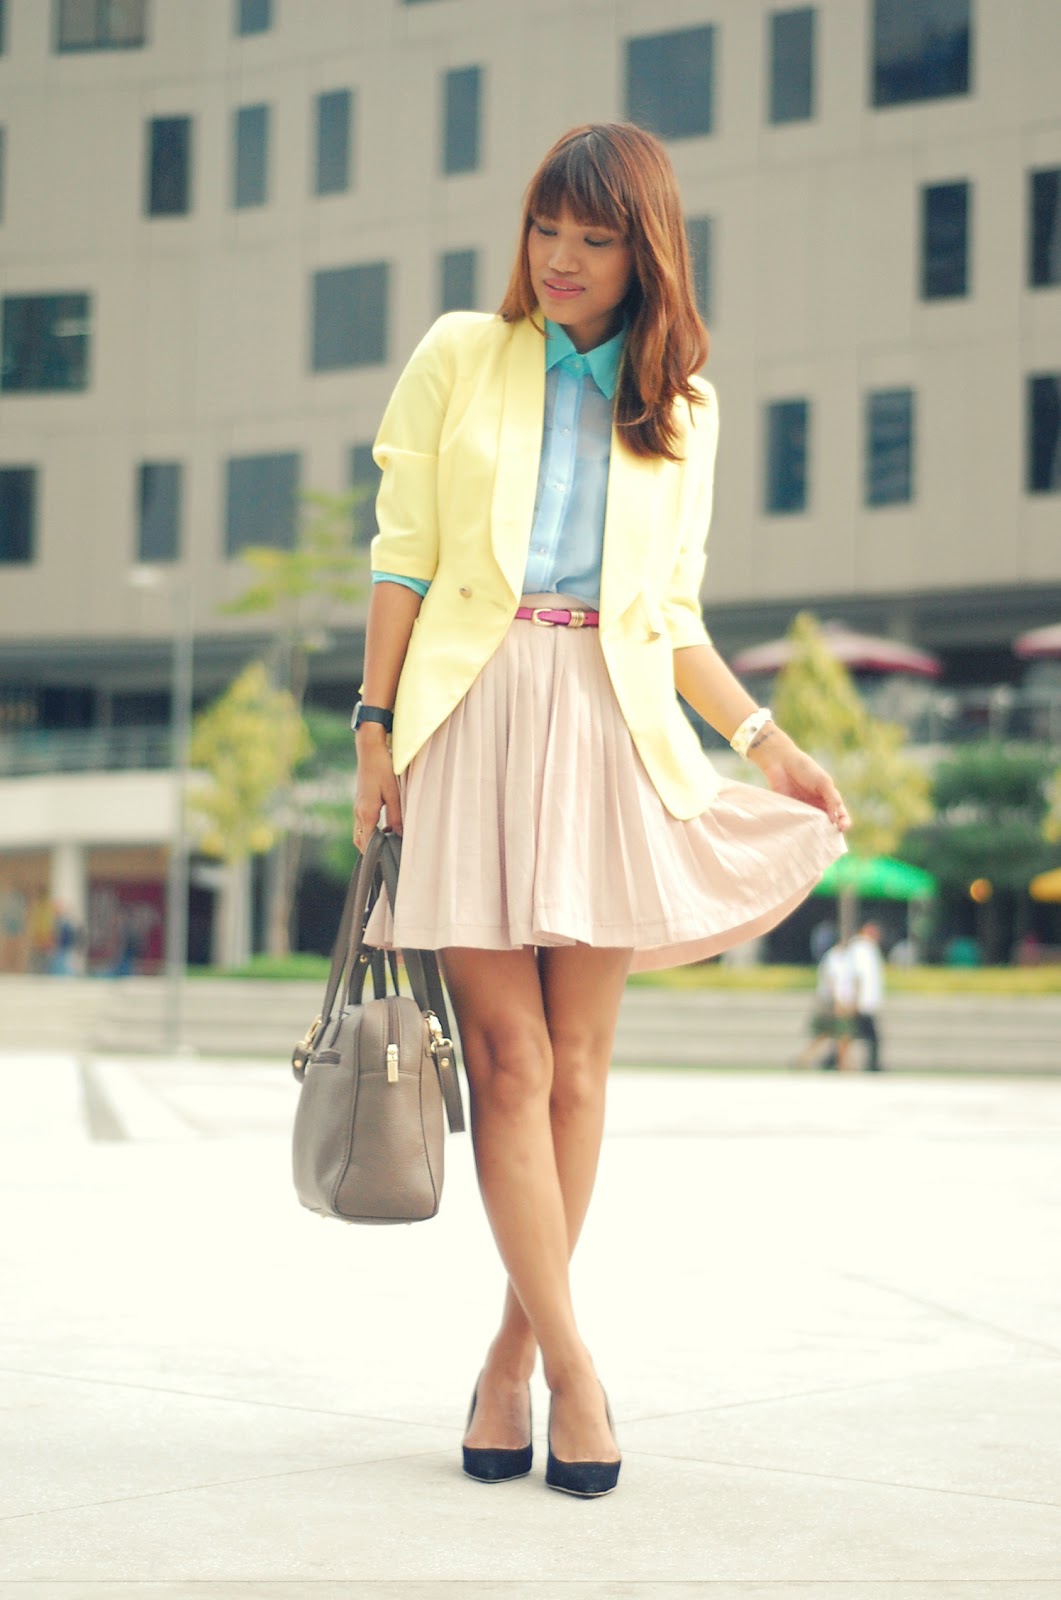 Preppy in Pastels | Drowning Equilibriums: Aisa Ipac - Fashion Stylist ...